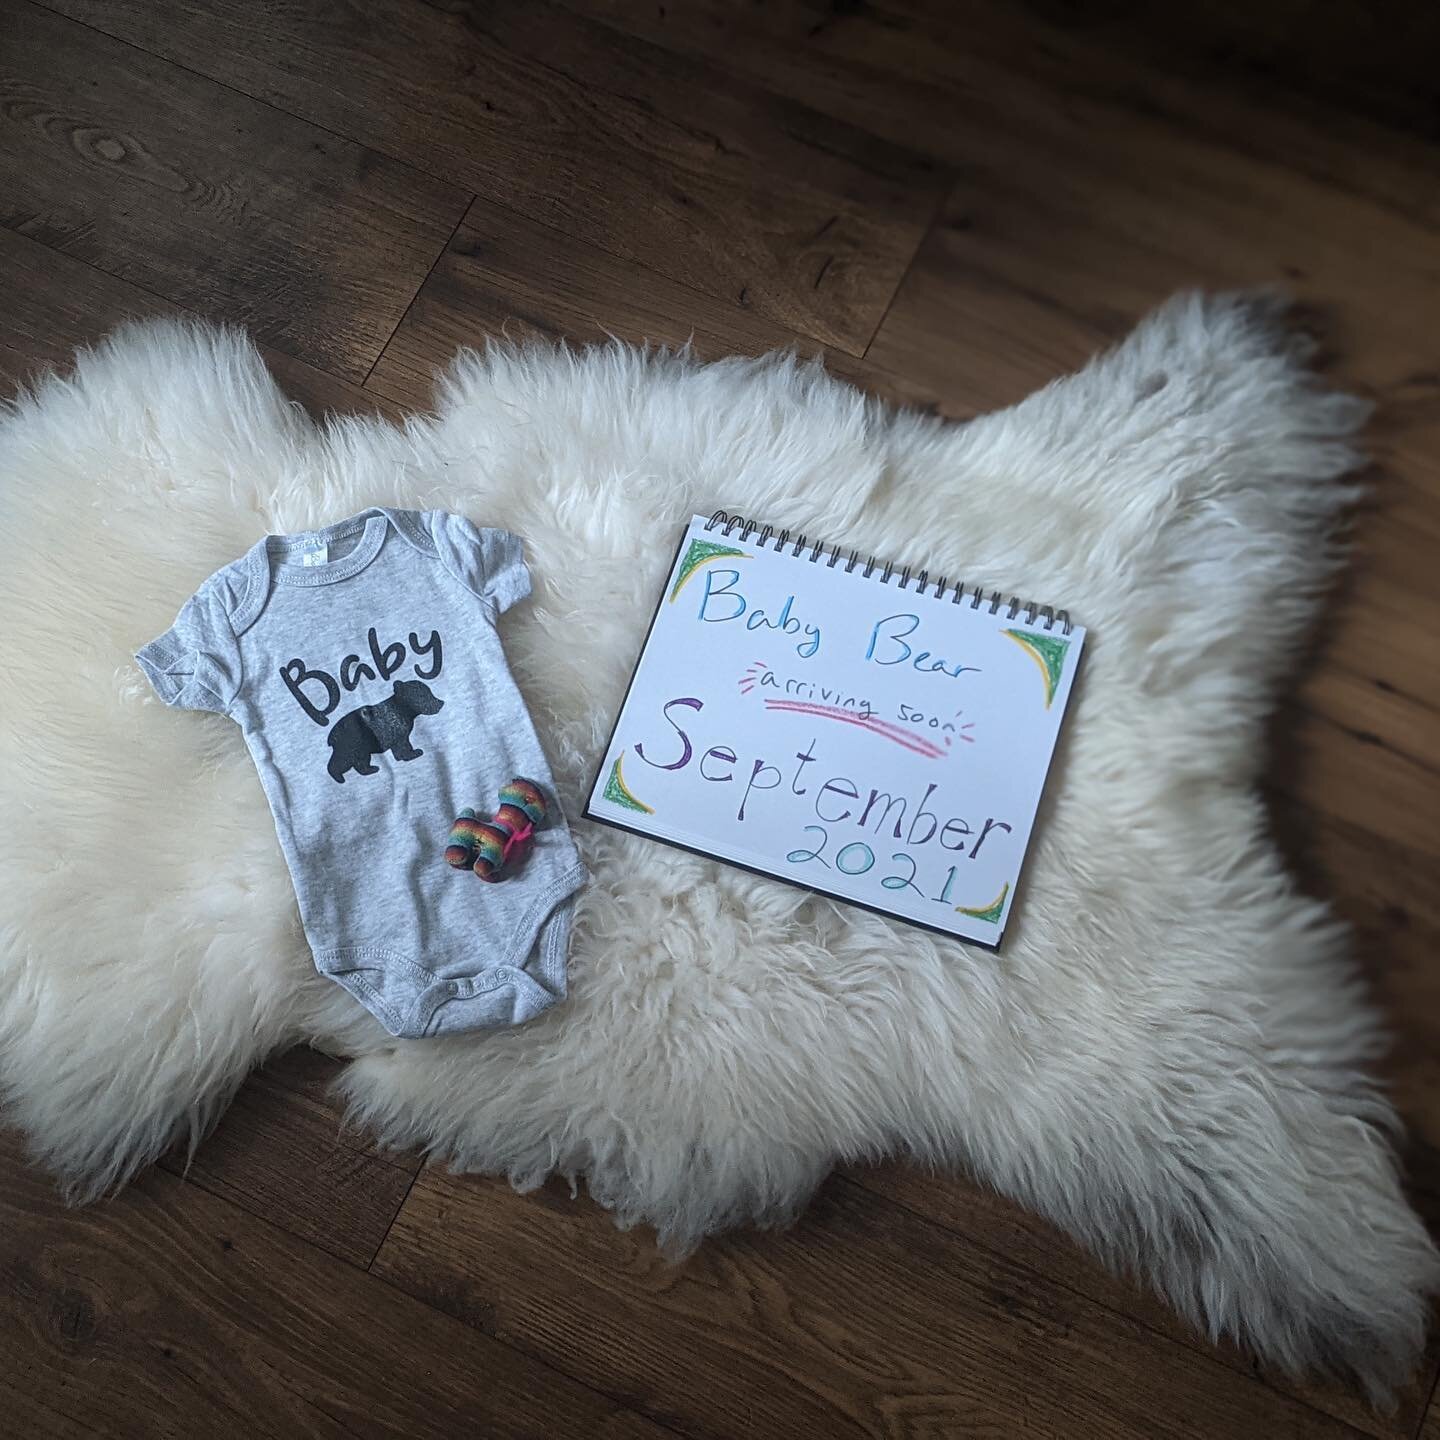 Josh Simpson and I are excited to welcome our own baby bear into the family this September!